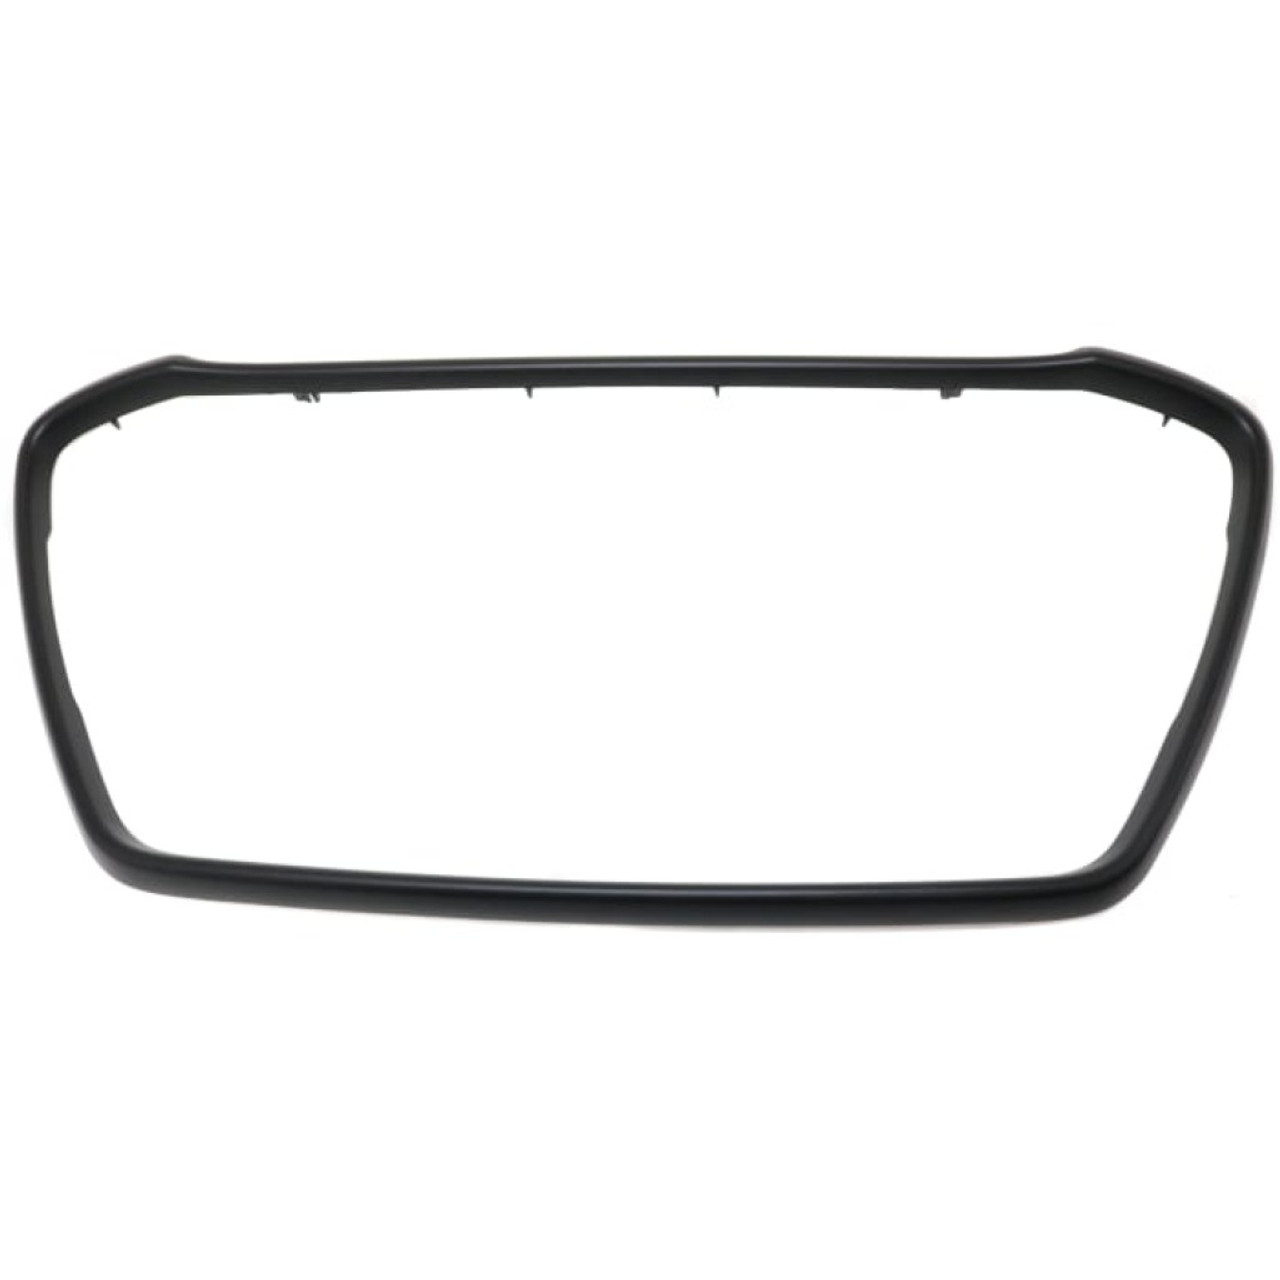 Stainless Rear Door Trunk Gate Lid Cover Trim For Mitsubishi OUTLANDER 13-15 